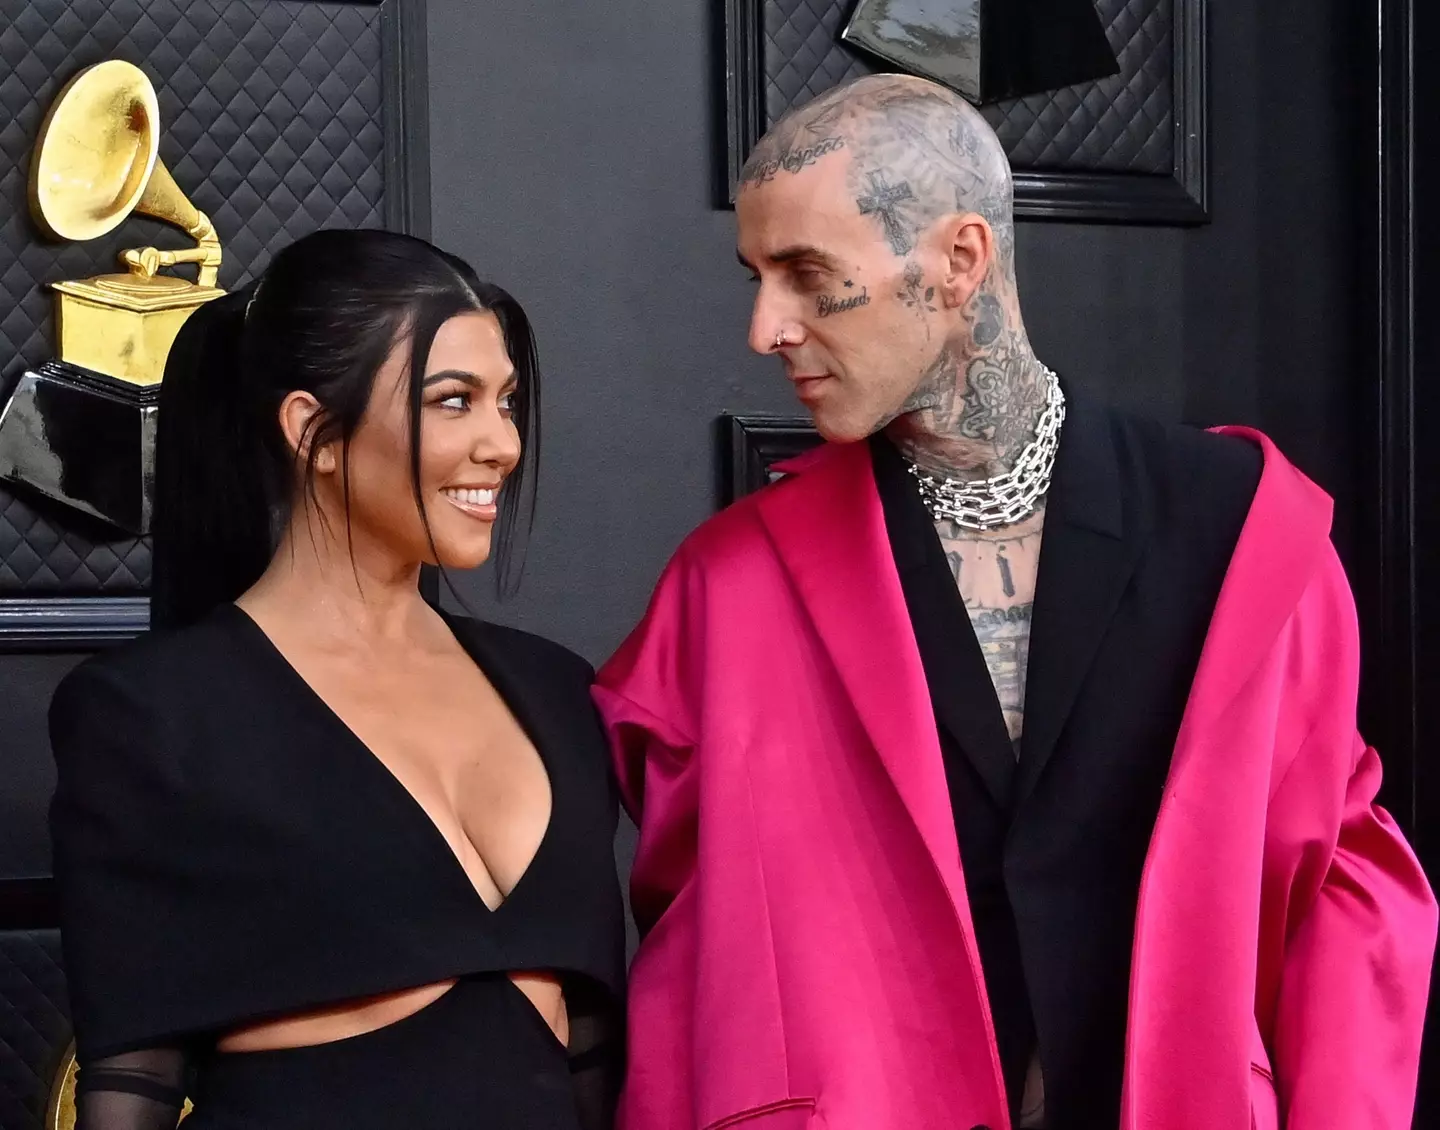 Kourtney Kardashian and Travis Barker arrive for the 64th annual Grammy Awards at the MGM Grand Garden Arena in Las Vegas, Nevada.